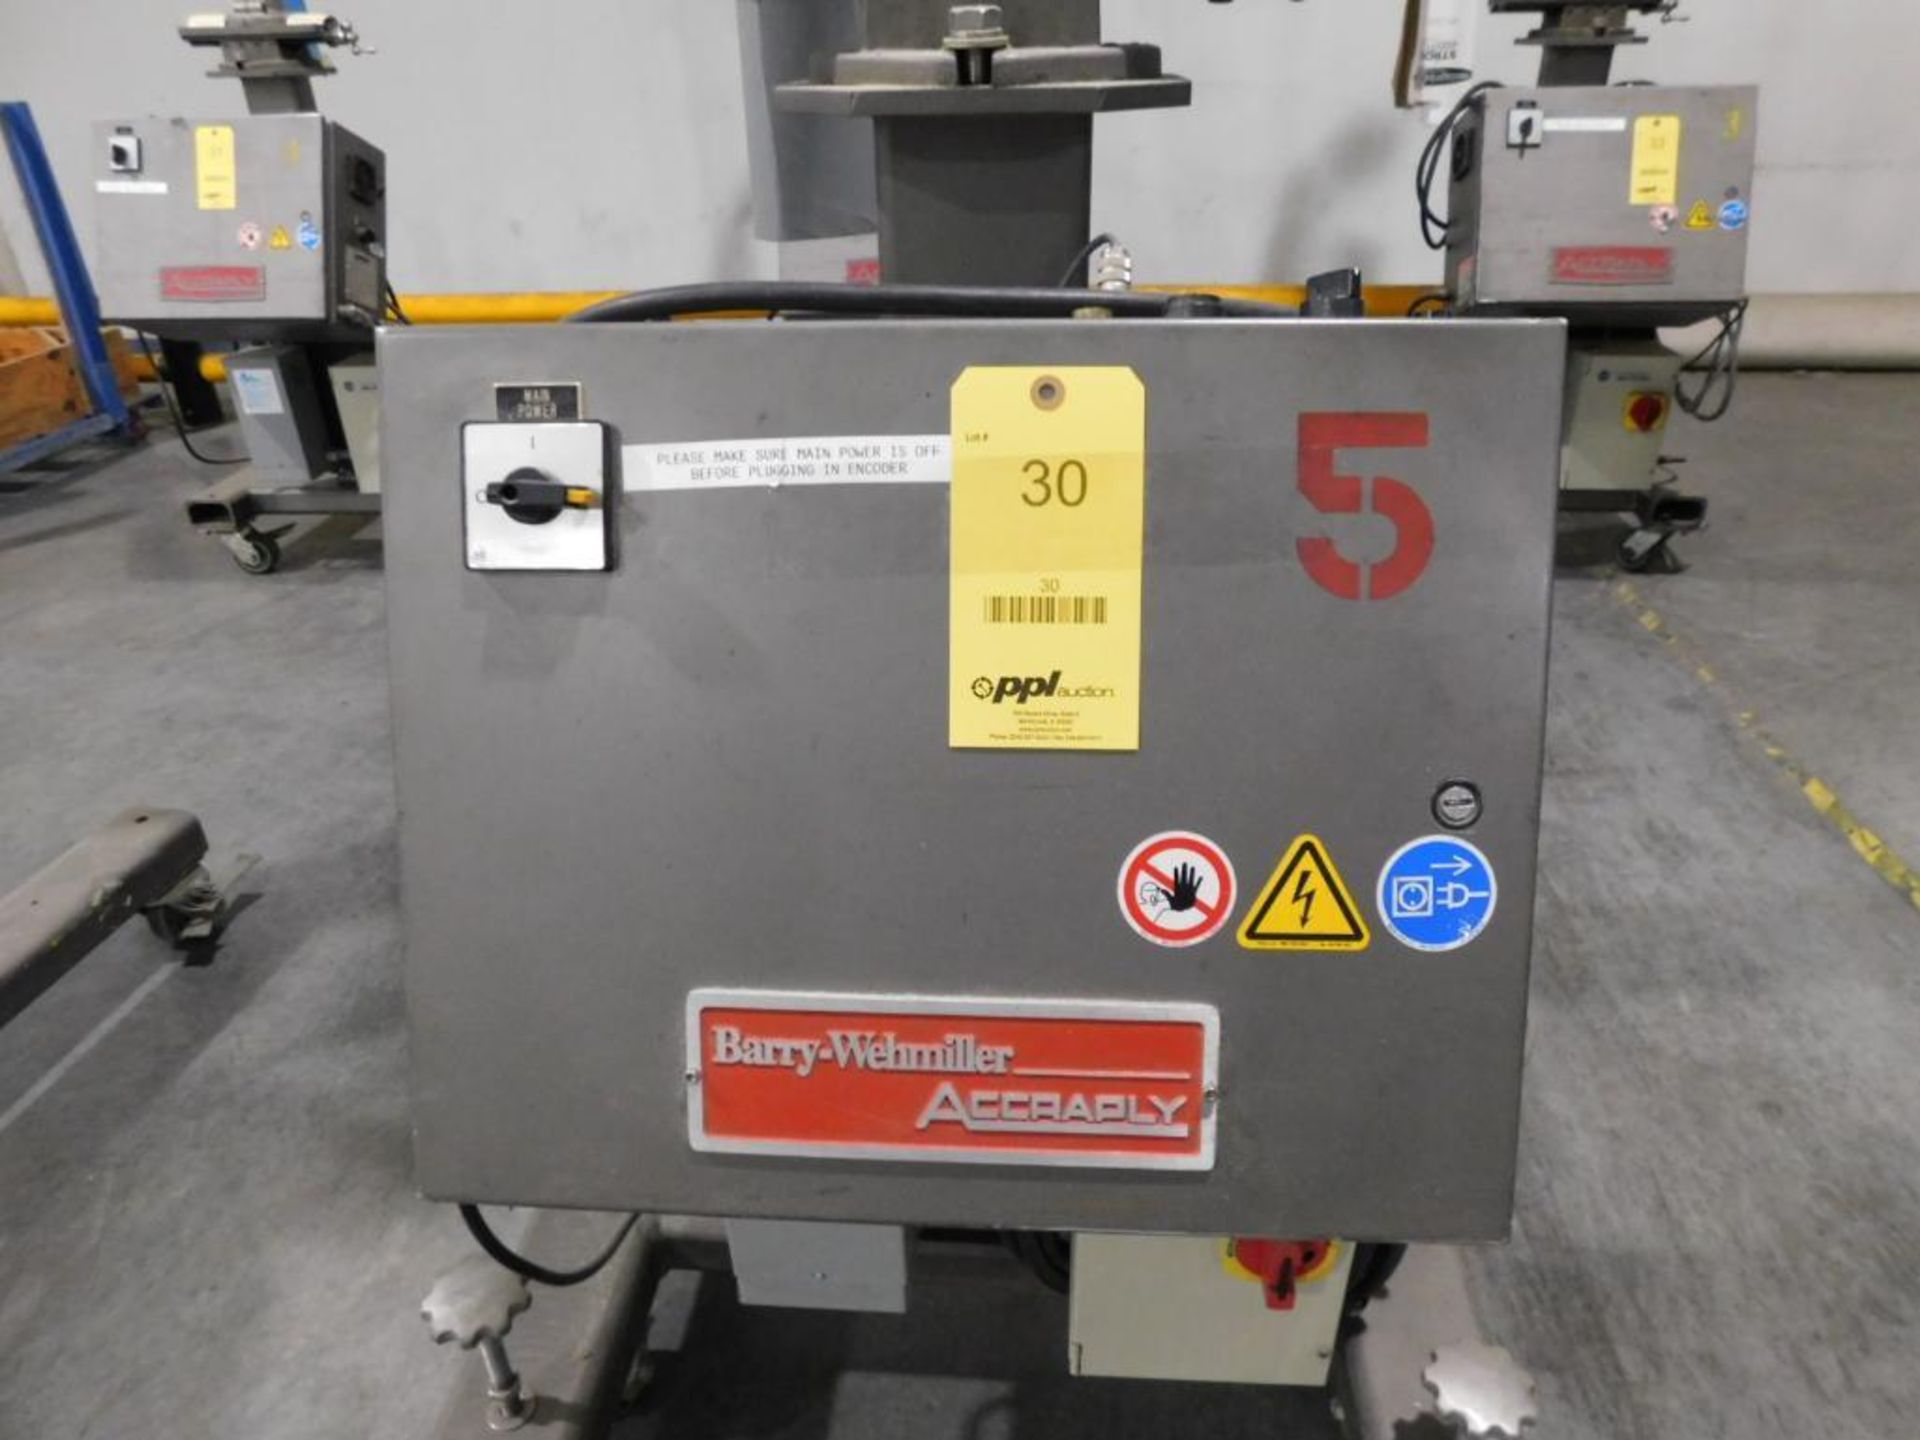 Accraply 5203HS Post It Applicator, S/N 5237, (Asset 5) (LOCATION: IN MAIL ROOM, 2ND FLOOR) - Image 5 of 9